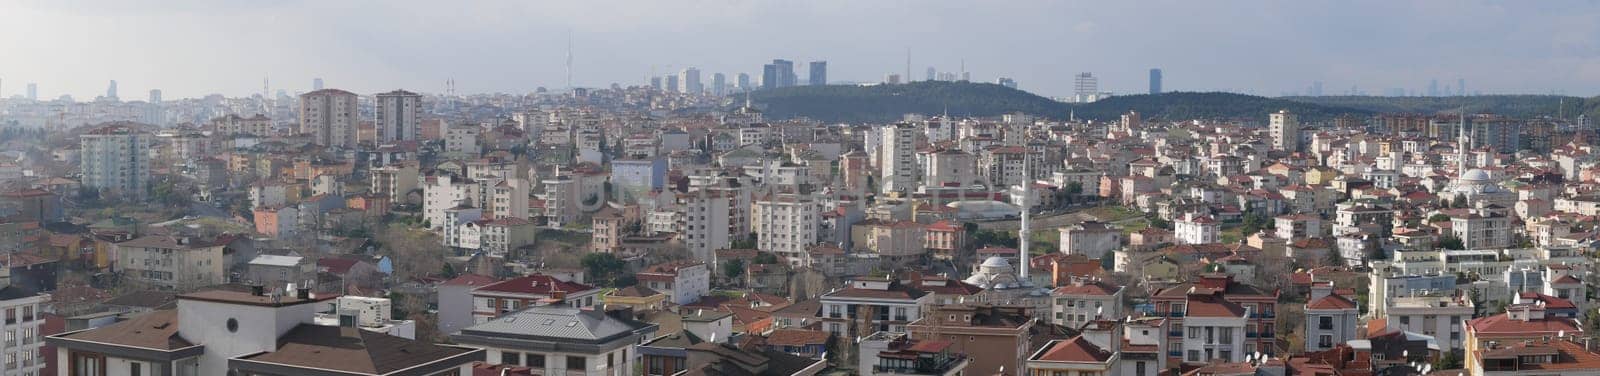 panorama of f Istanbul residential buildings by towfiq007